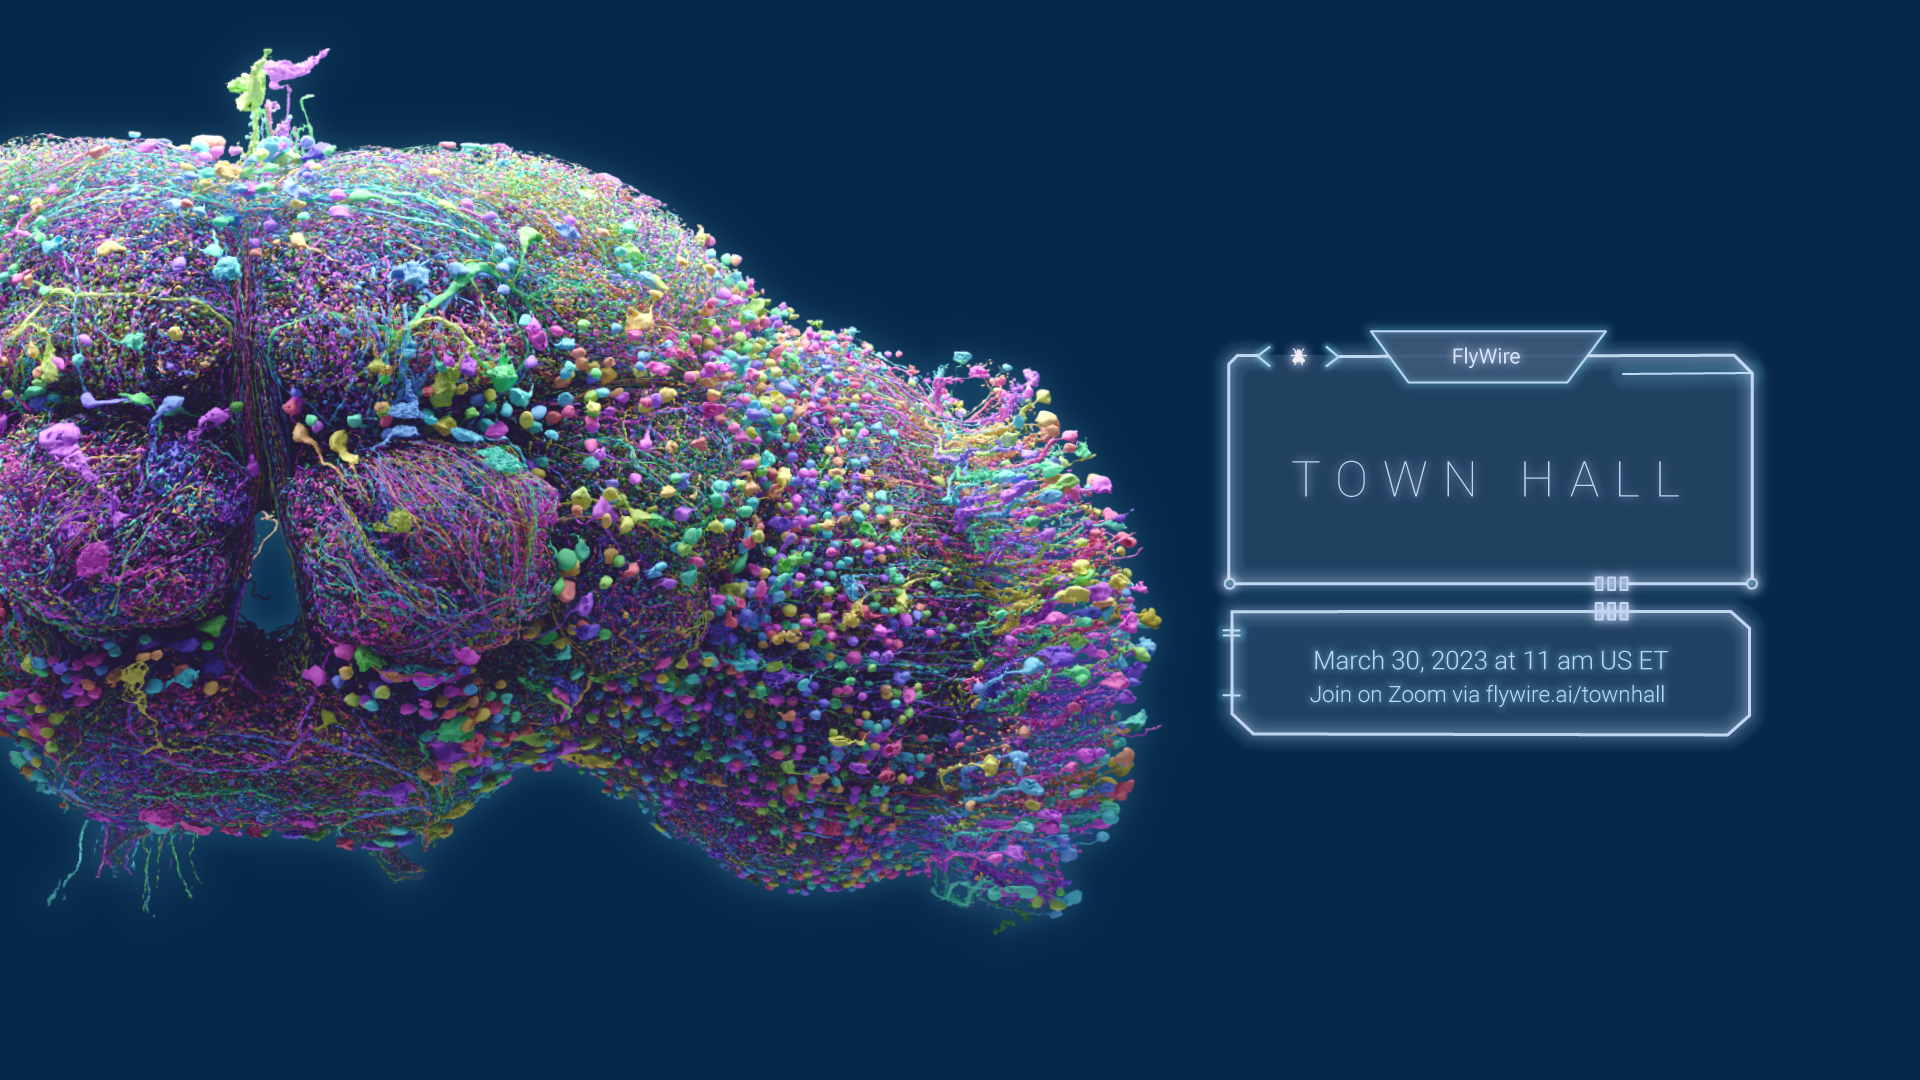 flywire town hall event poster, hologram UI